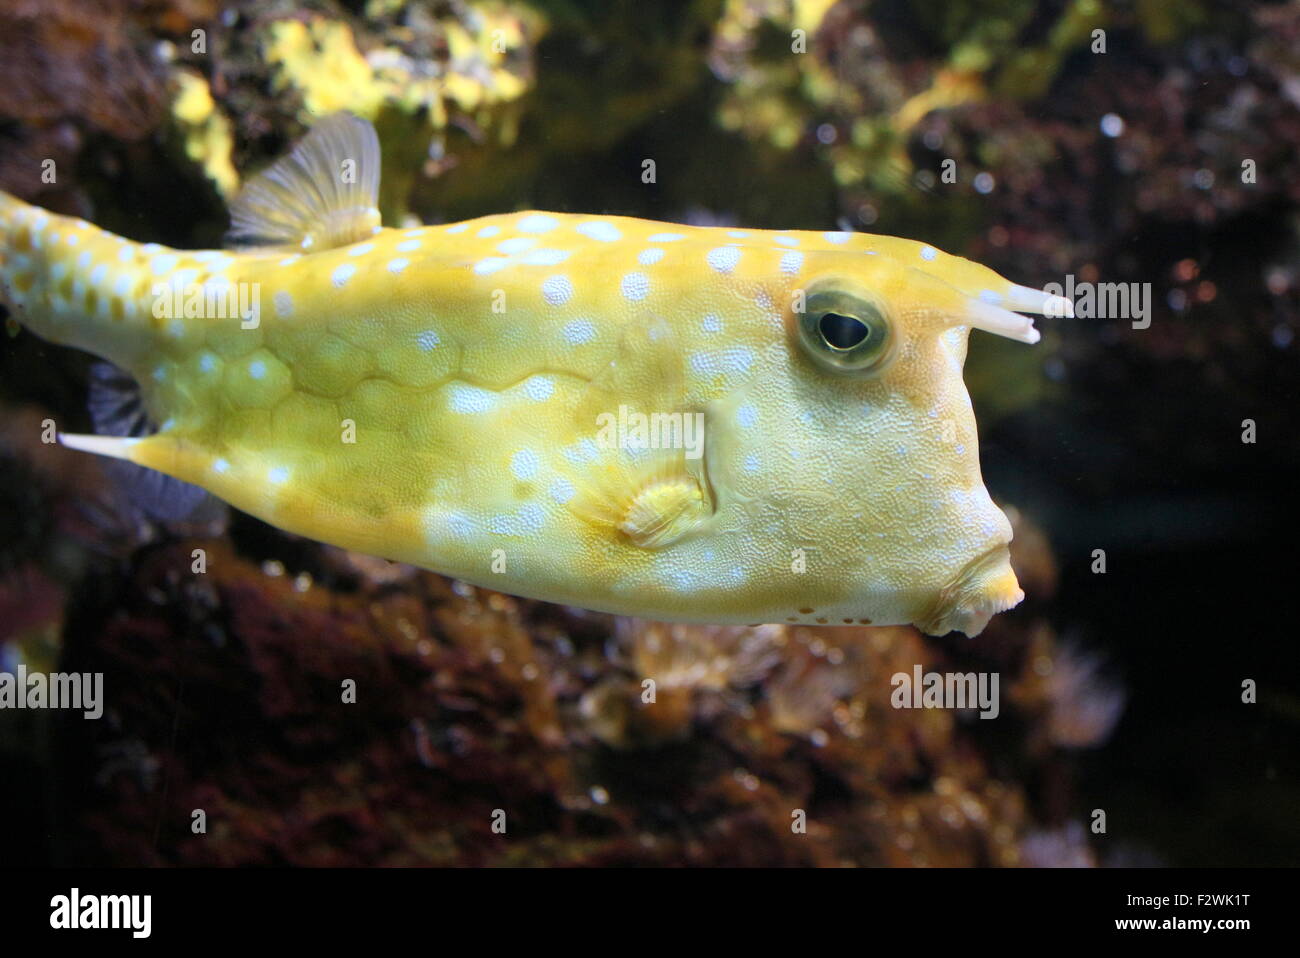 Longhorn cowfish (Lactoria cornuta), native to the Red Sea and Indian Ocean. A.k.a. horned boxfish Stock Photo